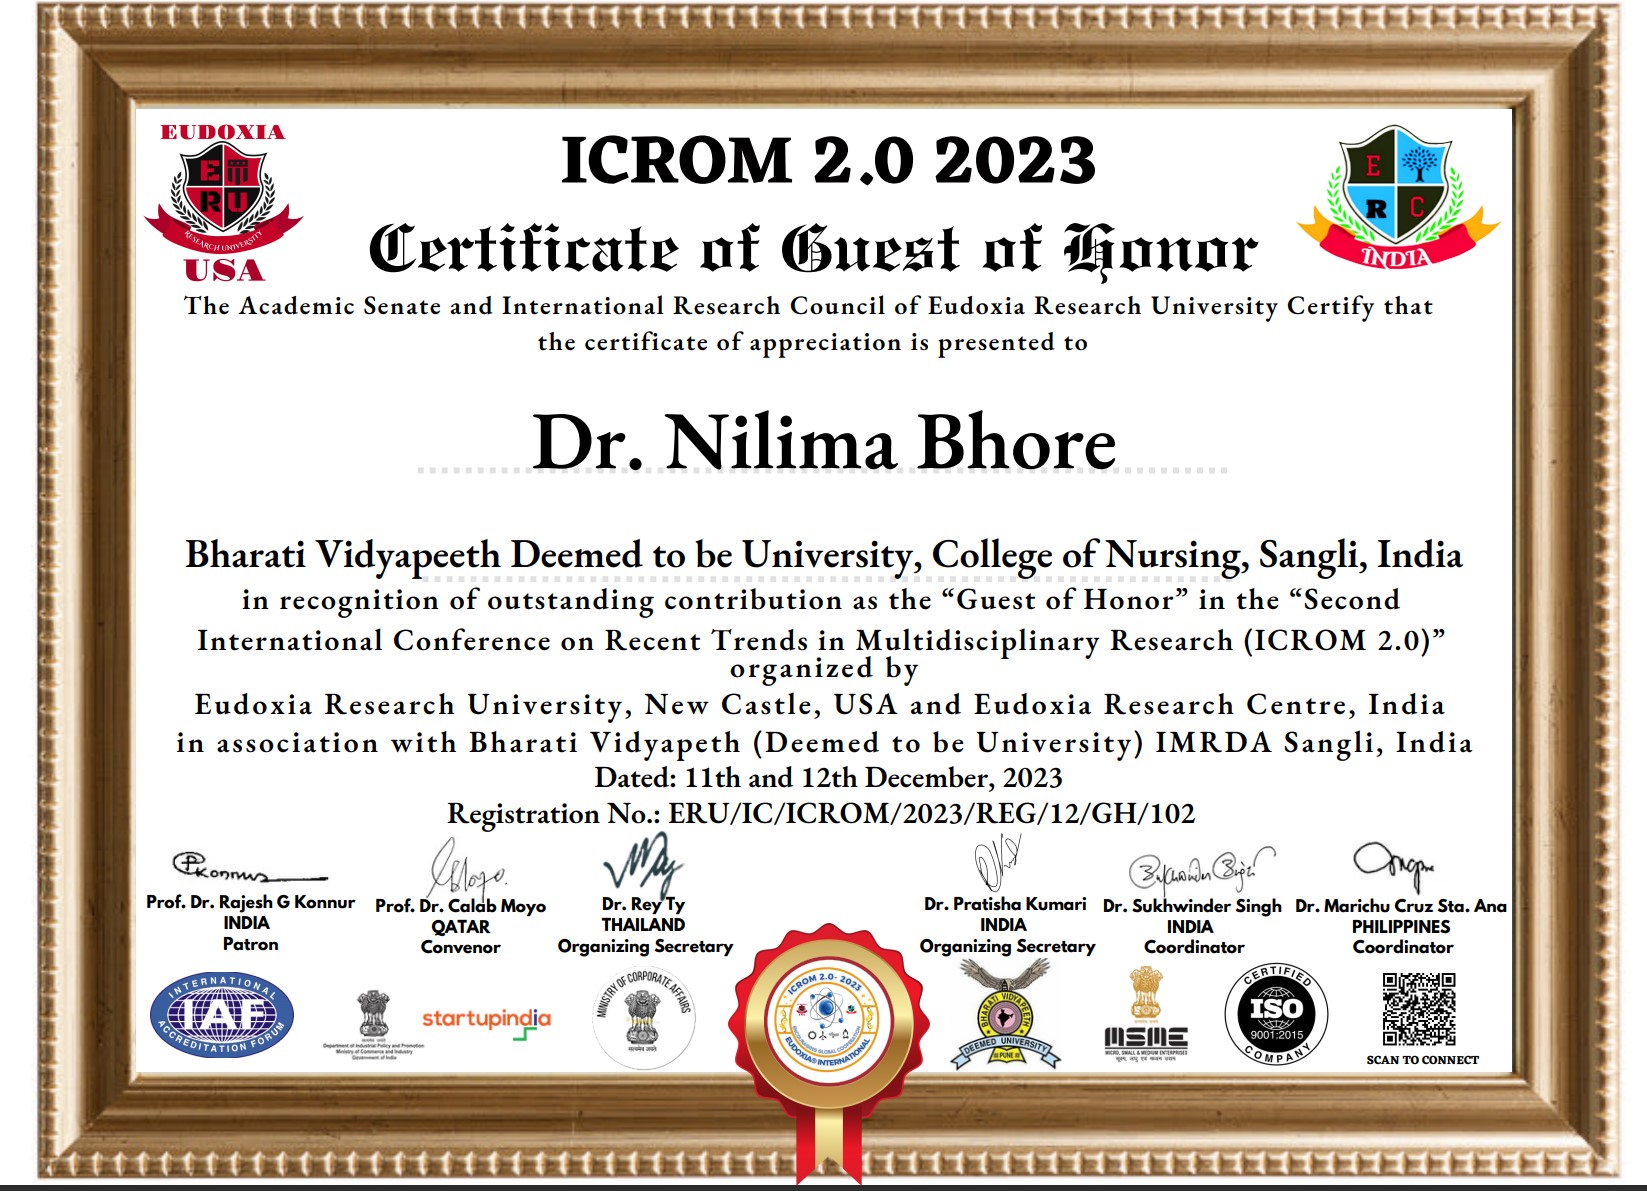 Dr. Nilima R Bhore as a Guest of Honor